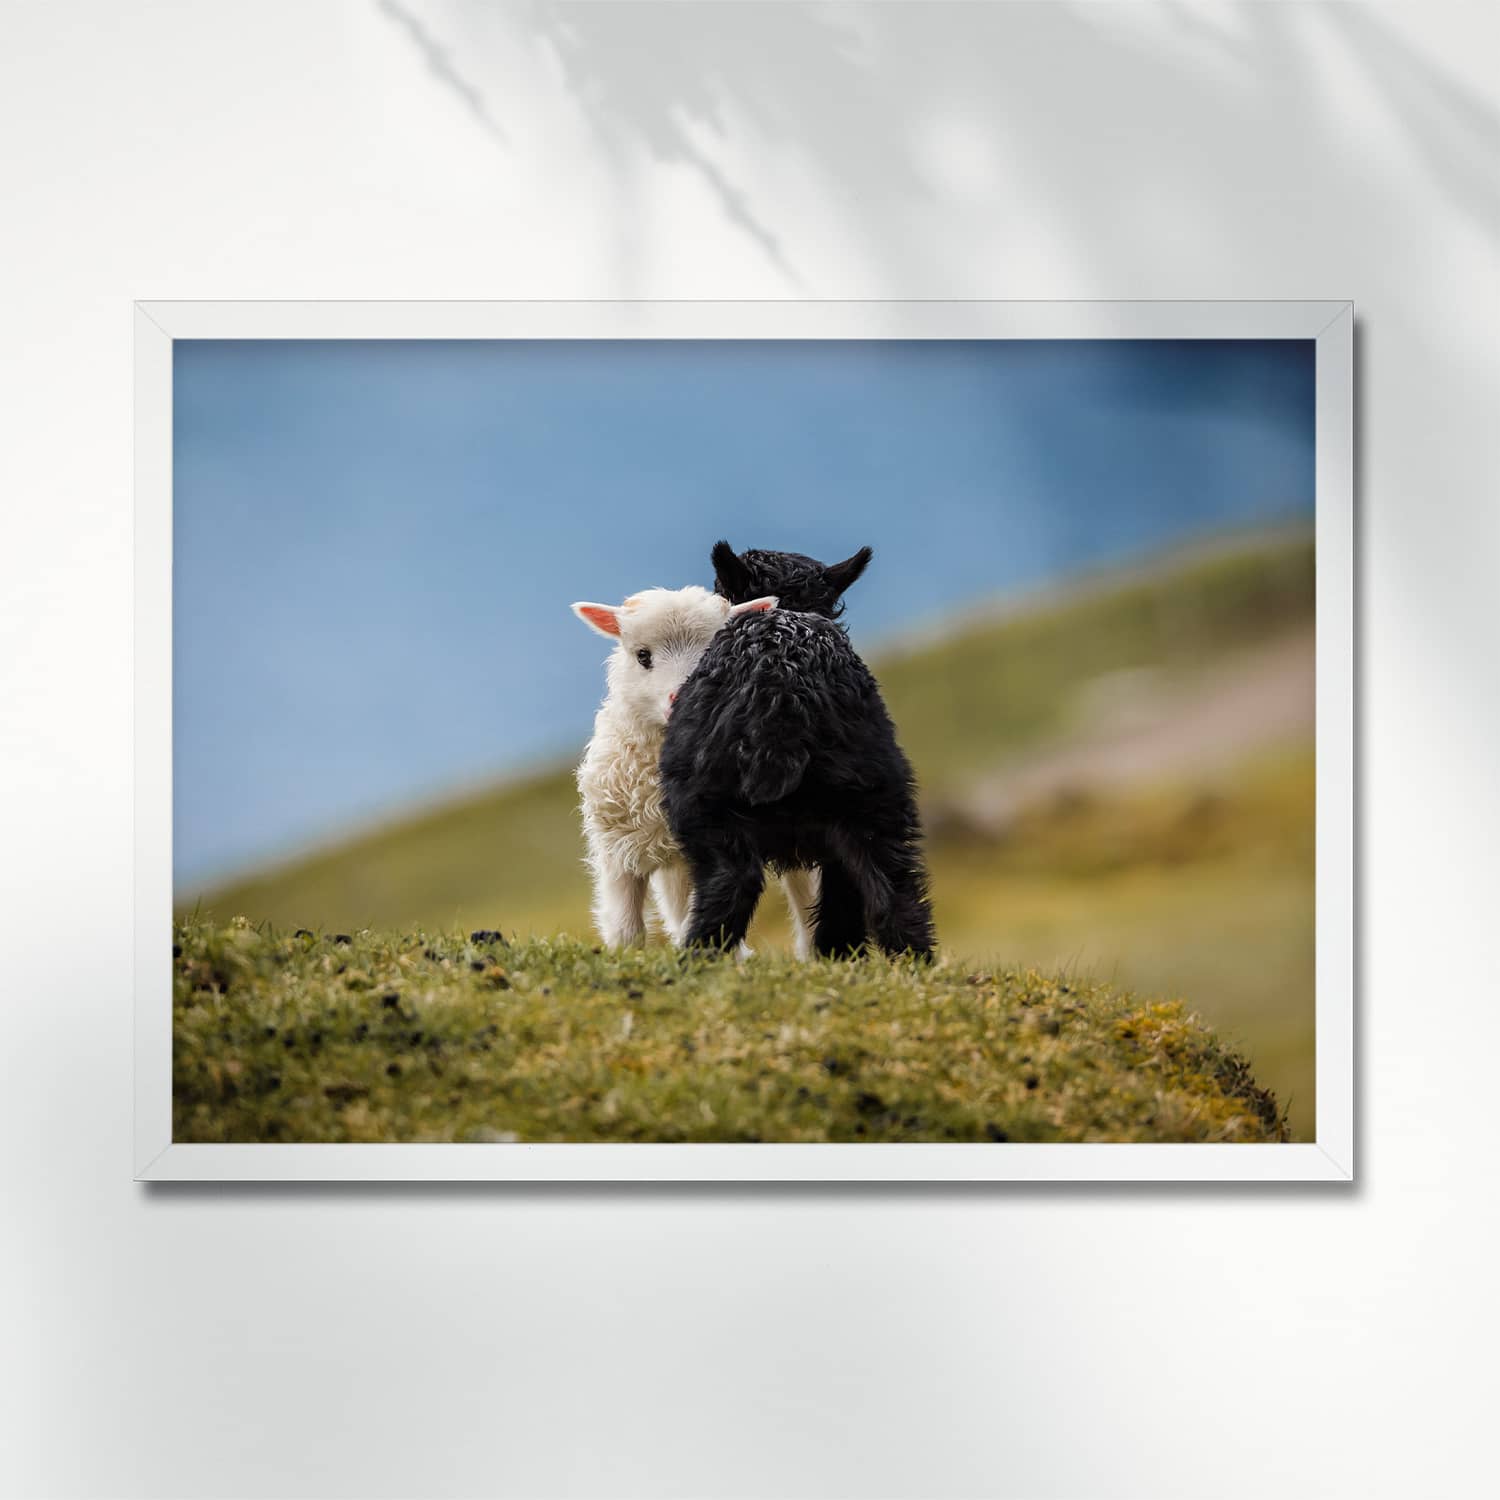 BLACK AND WHITE COUPLE OF LAMBS, FAROE ISLANDS - POSTER lambs sheep couple portrait poster frame